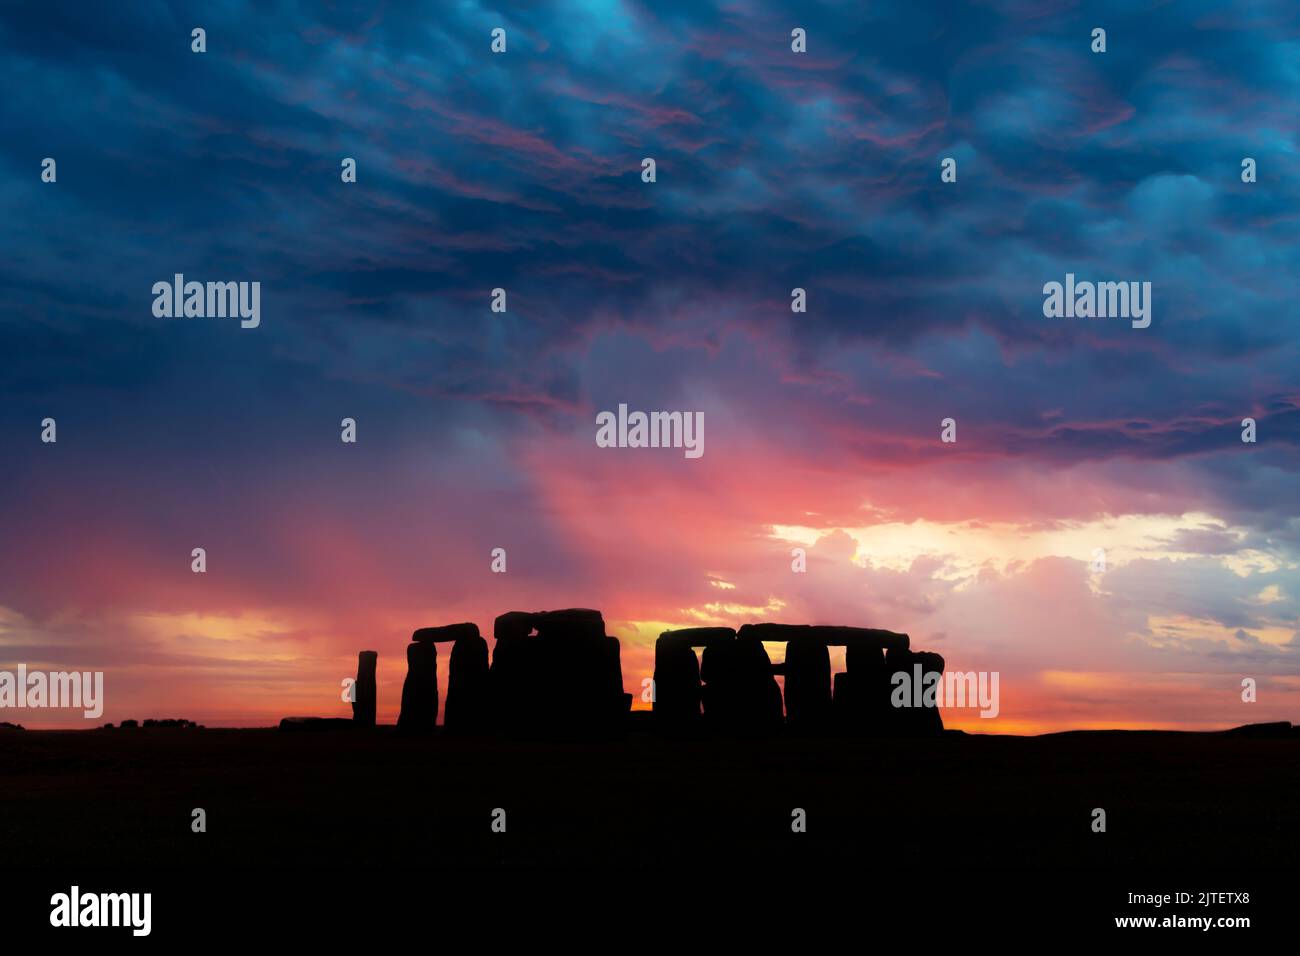 The famous prehistorical monument of Stonehenge with a dramatic sky at sunset, United Kingdom Stock Photo